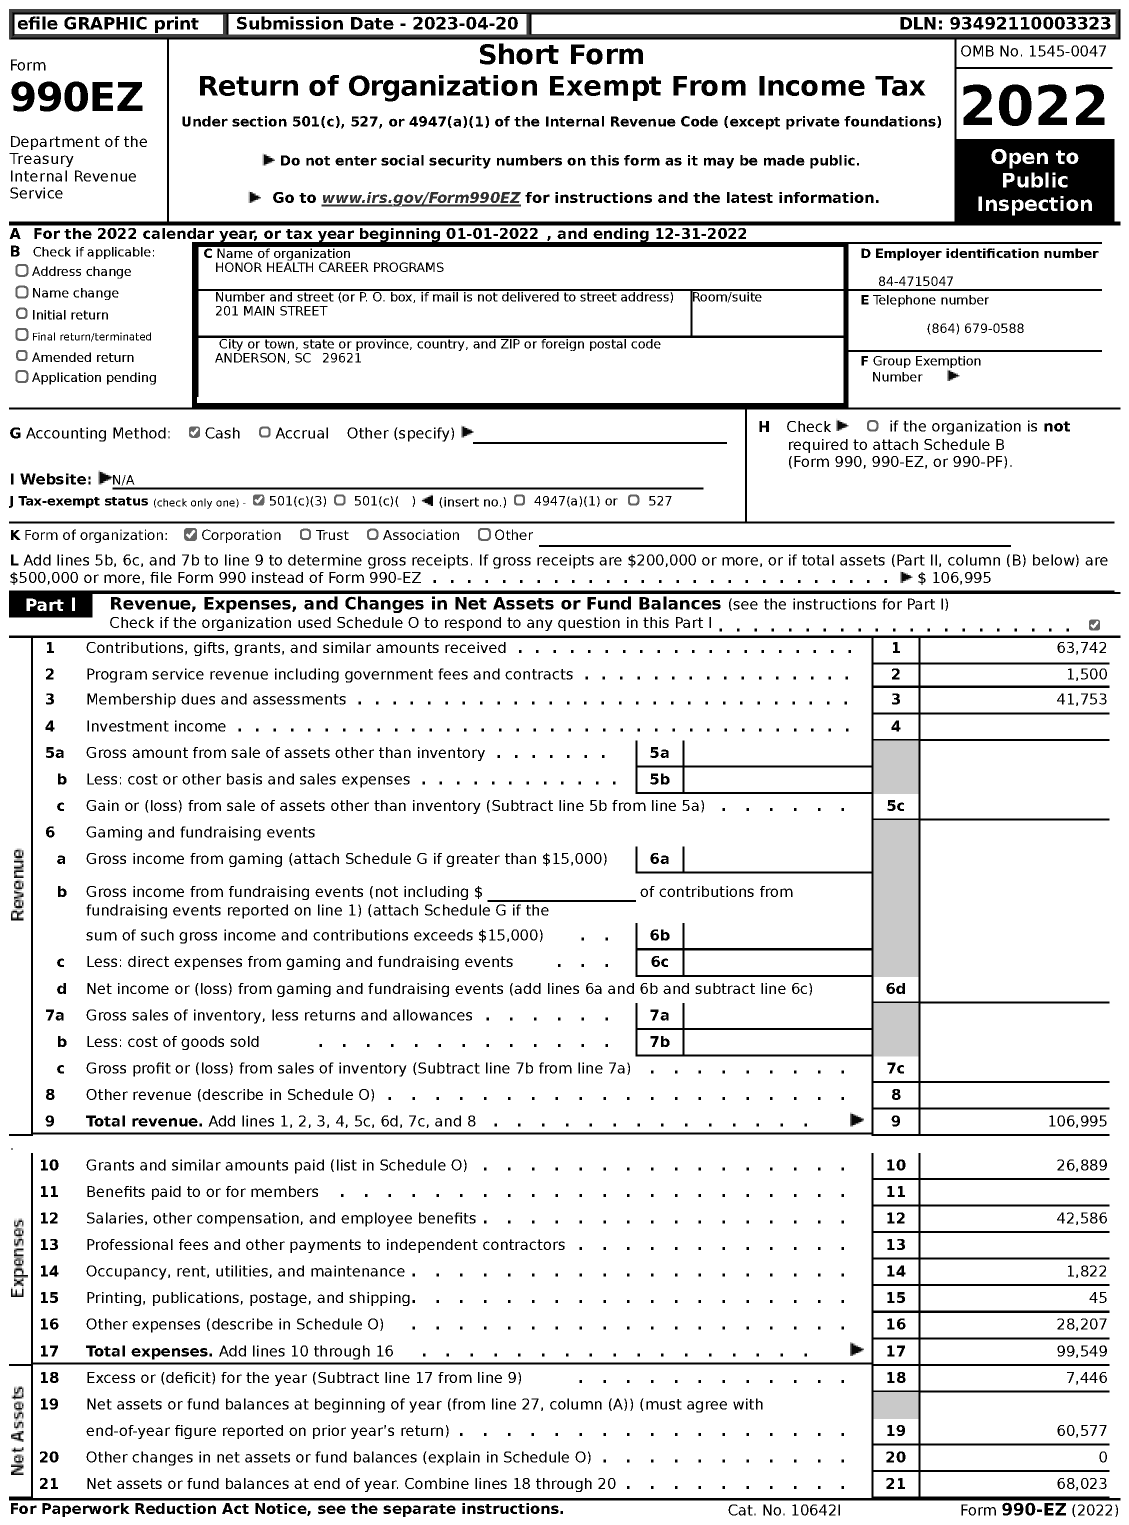 Image of first page of 2022 Form 990EZ for Honor Health Career Programs